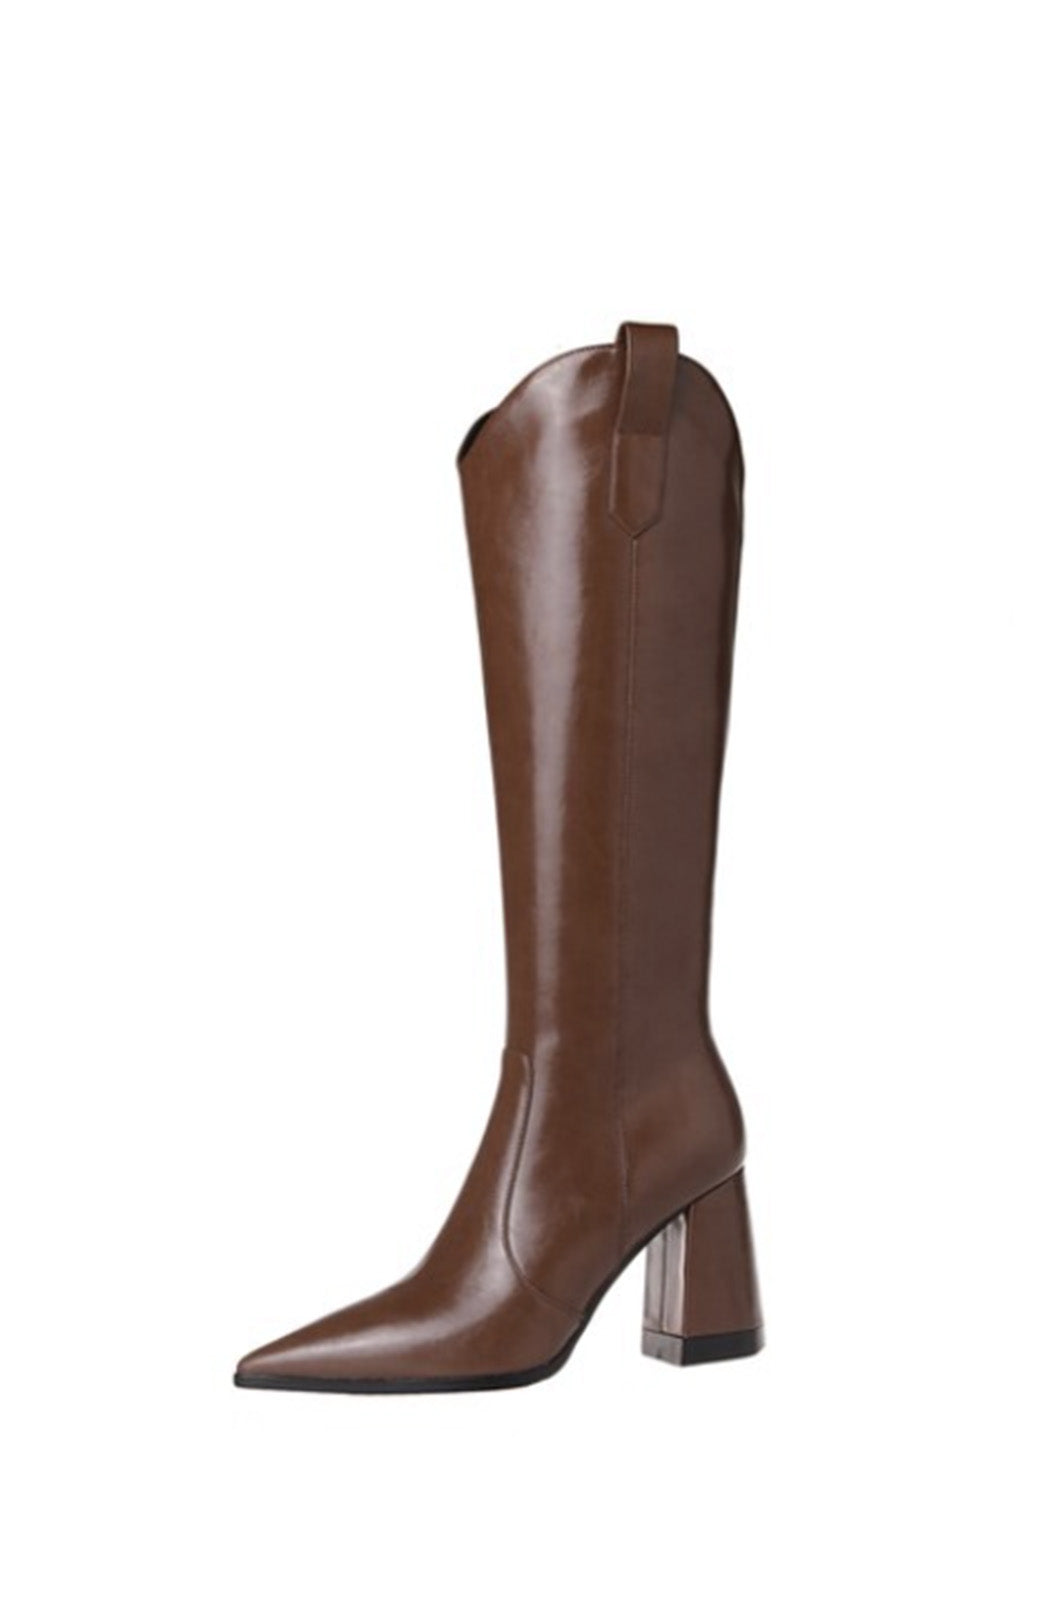 Pointed toe western boots